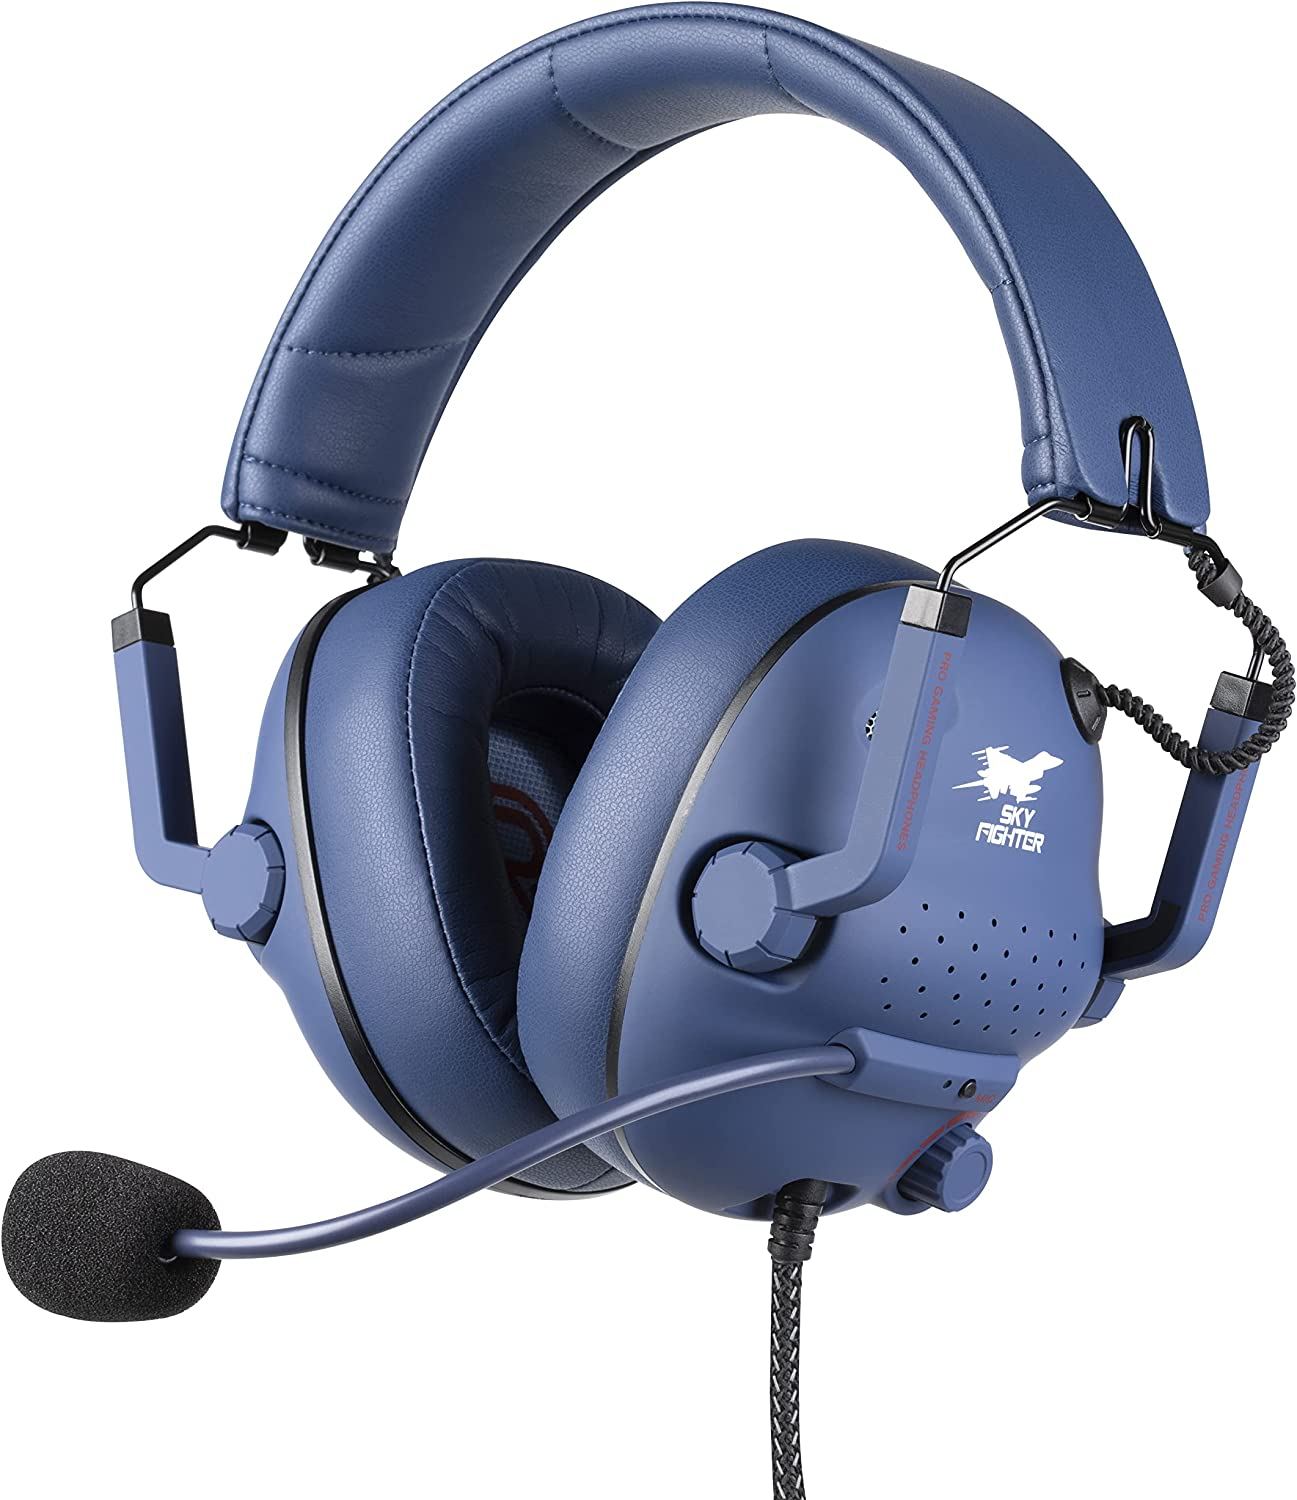 Konix Skyfighter Gaming Headset (Blue) for PC Windows for